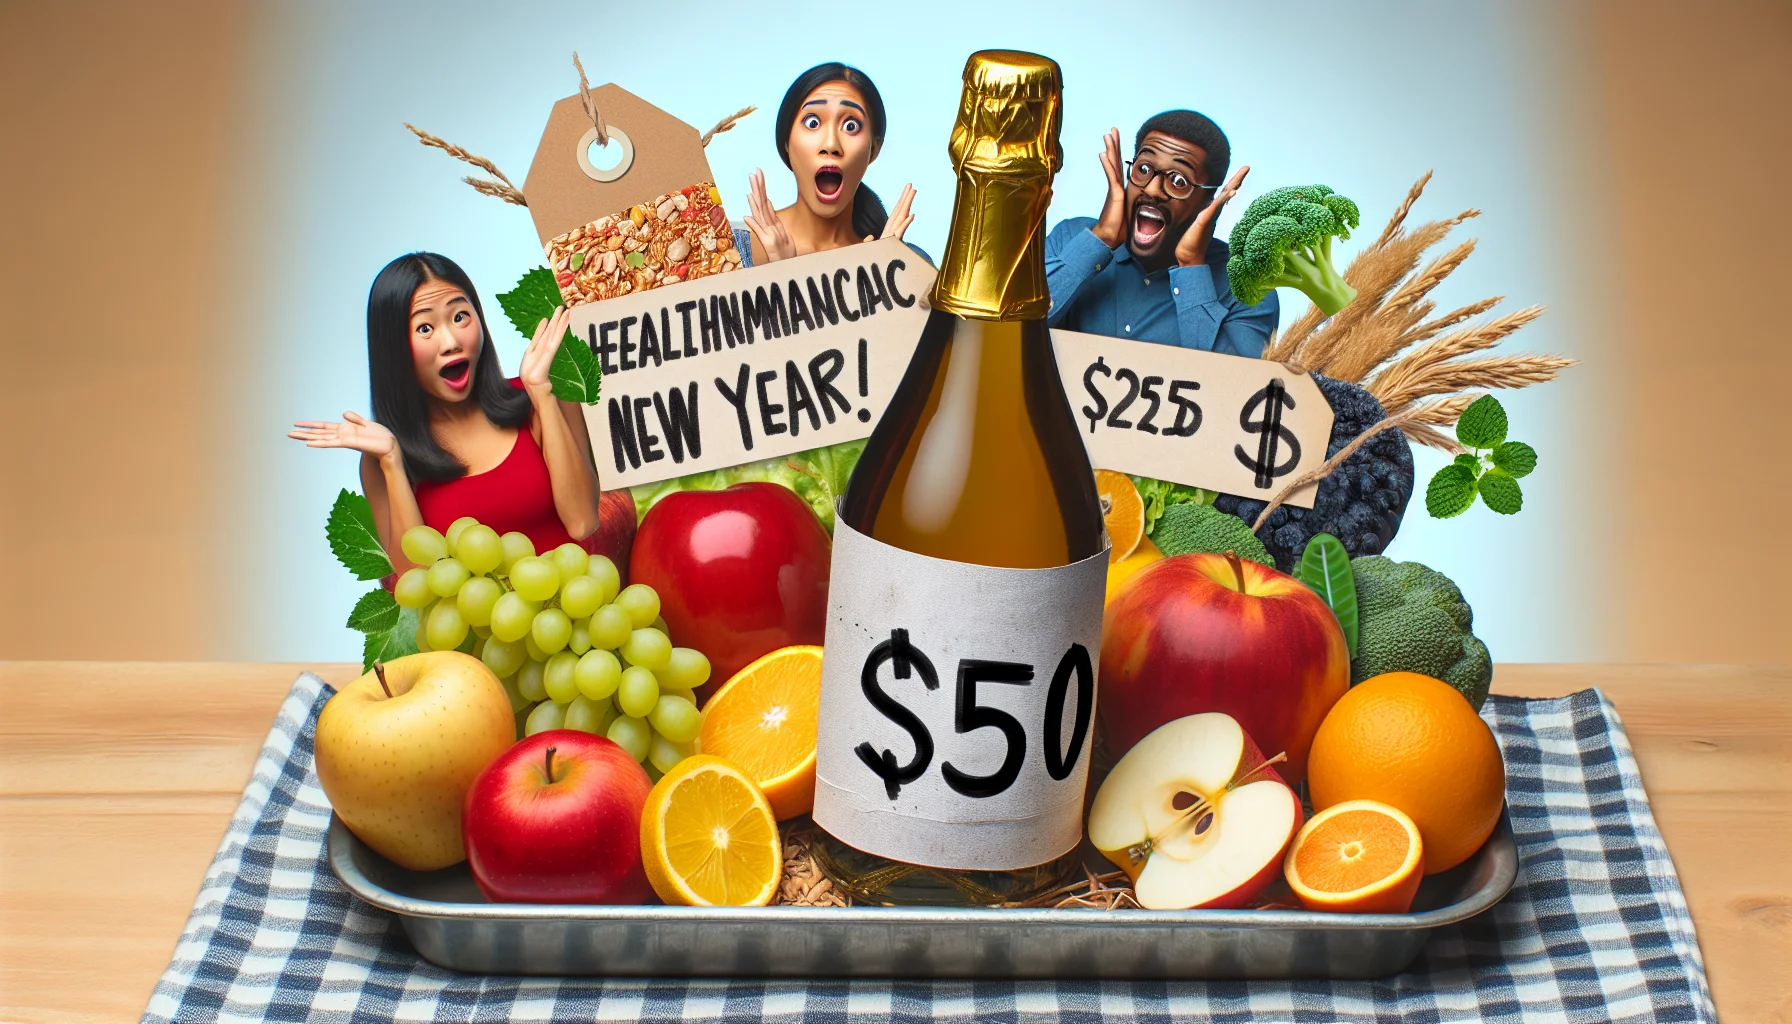 Create a realistic and humorous image of a DIY Sparkling Cider for celebrating New Year's eve. The Sparkling cider is placed in a creatively decorated setting, showcasing plentiful fruits, vegetables and whole grains to signify eating healthy. Beside, there's a price tag dramatically slashed in half as a symbol to spending less money. Include a diverse group of people, with an Asian female and a Black male having surprised and delighted expressions. There's also a banner above written 'Healthy and Economical New Year!' as the centerpiece to set the tone.